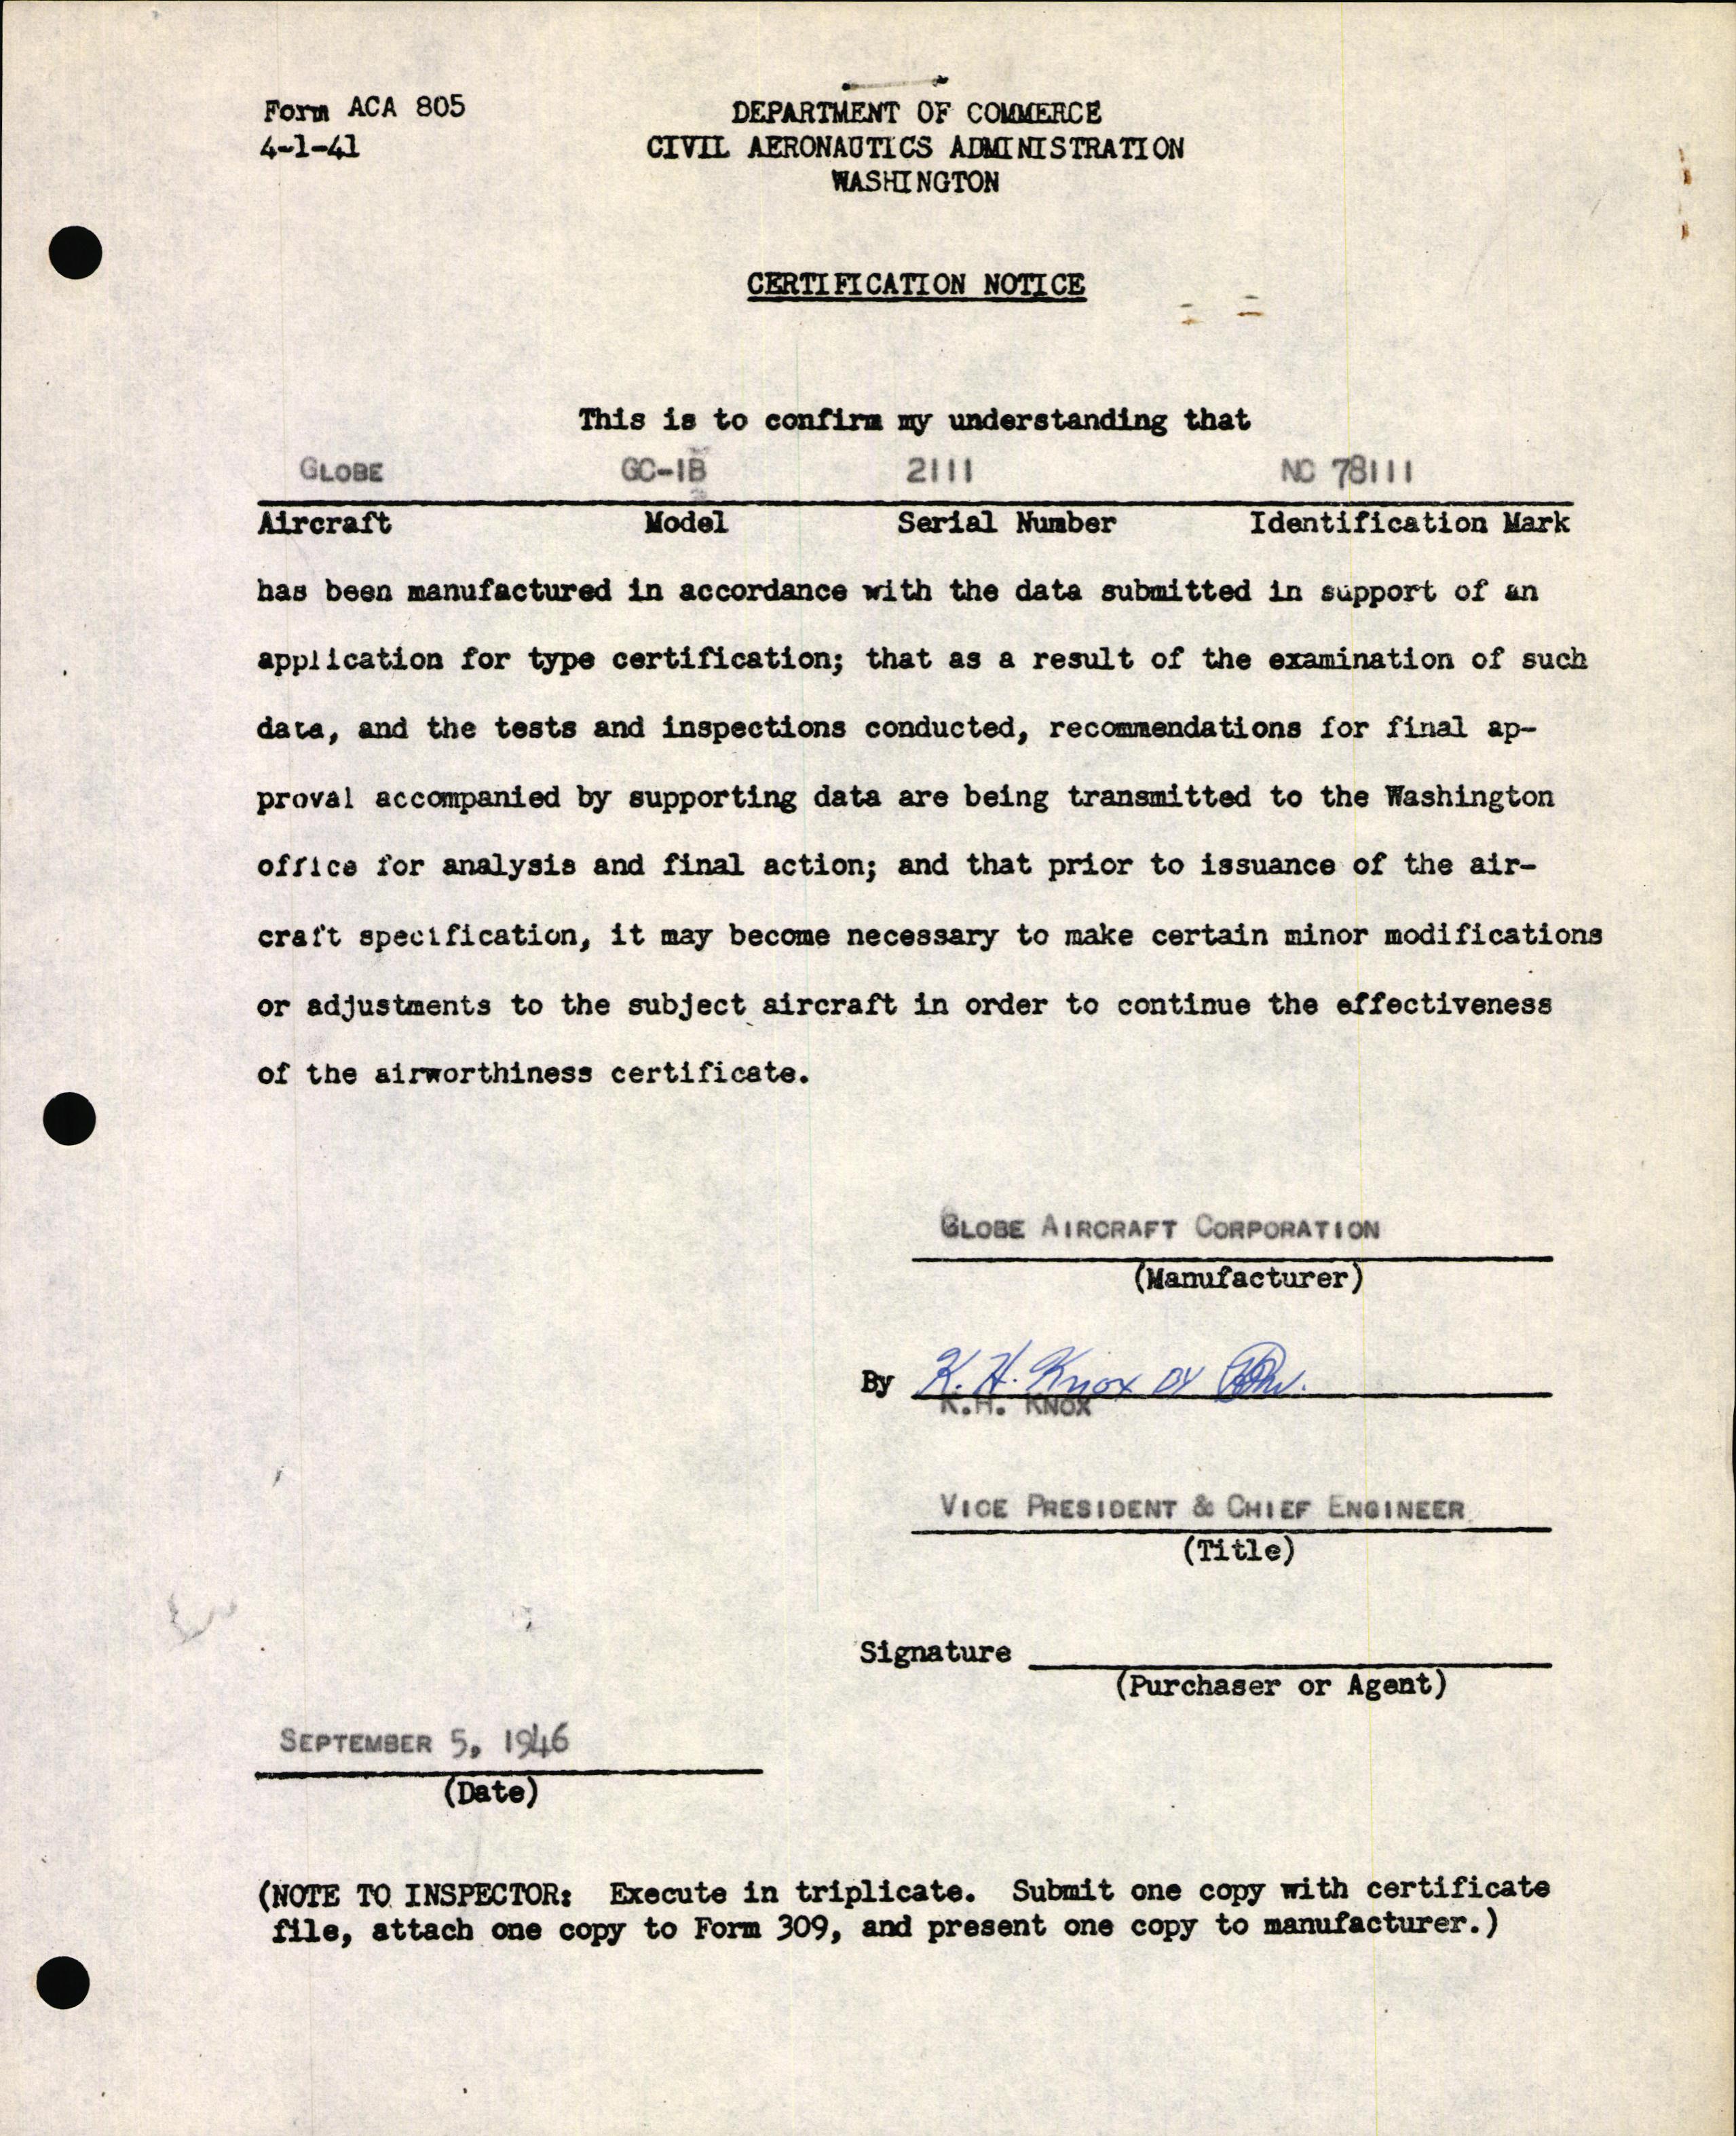 Sample page 1 from AirCorps Library document: Technical Information for Serial Number 2111